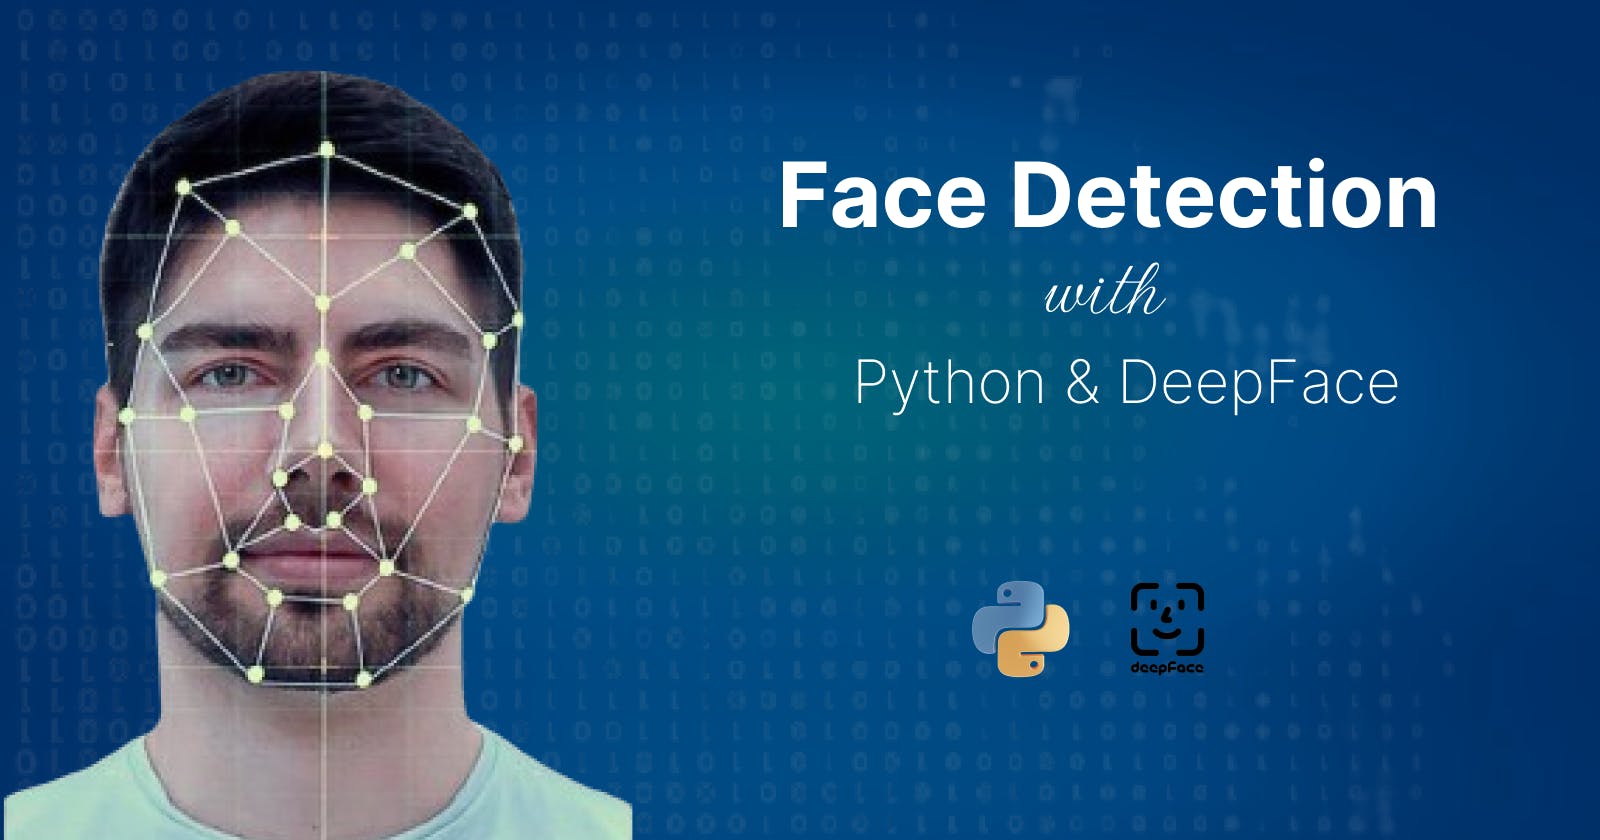 Face Detection with Python & DeepFace